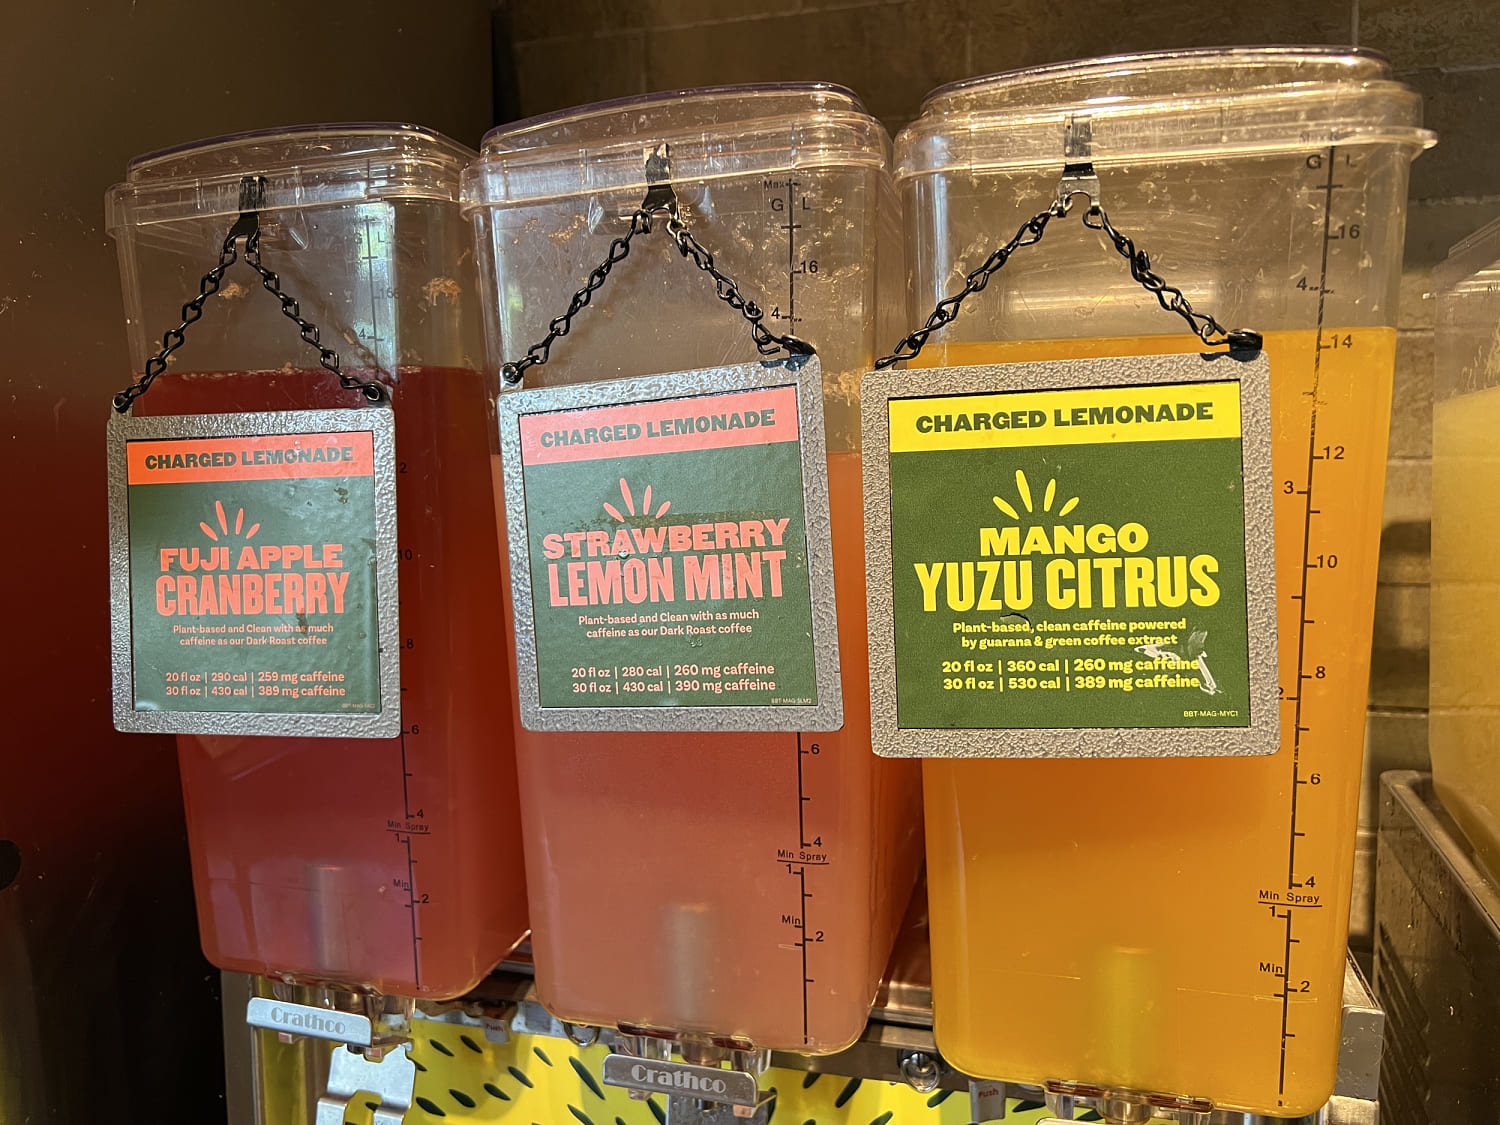 panera says it is phasing out its controversial charged lemonade